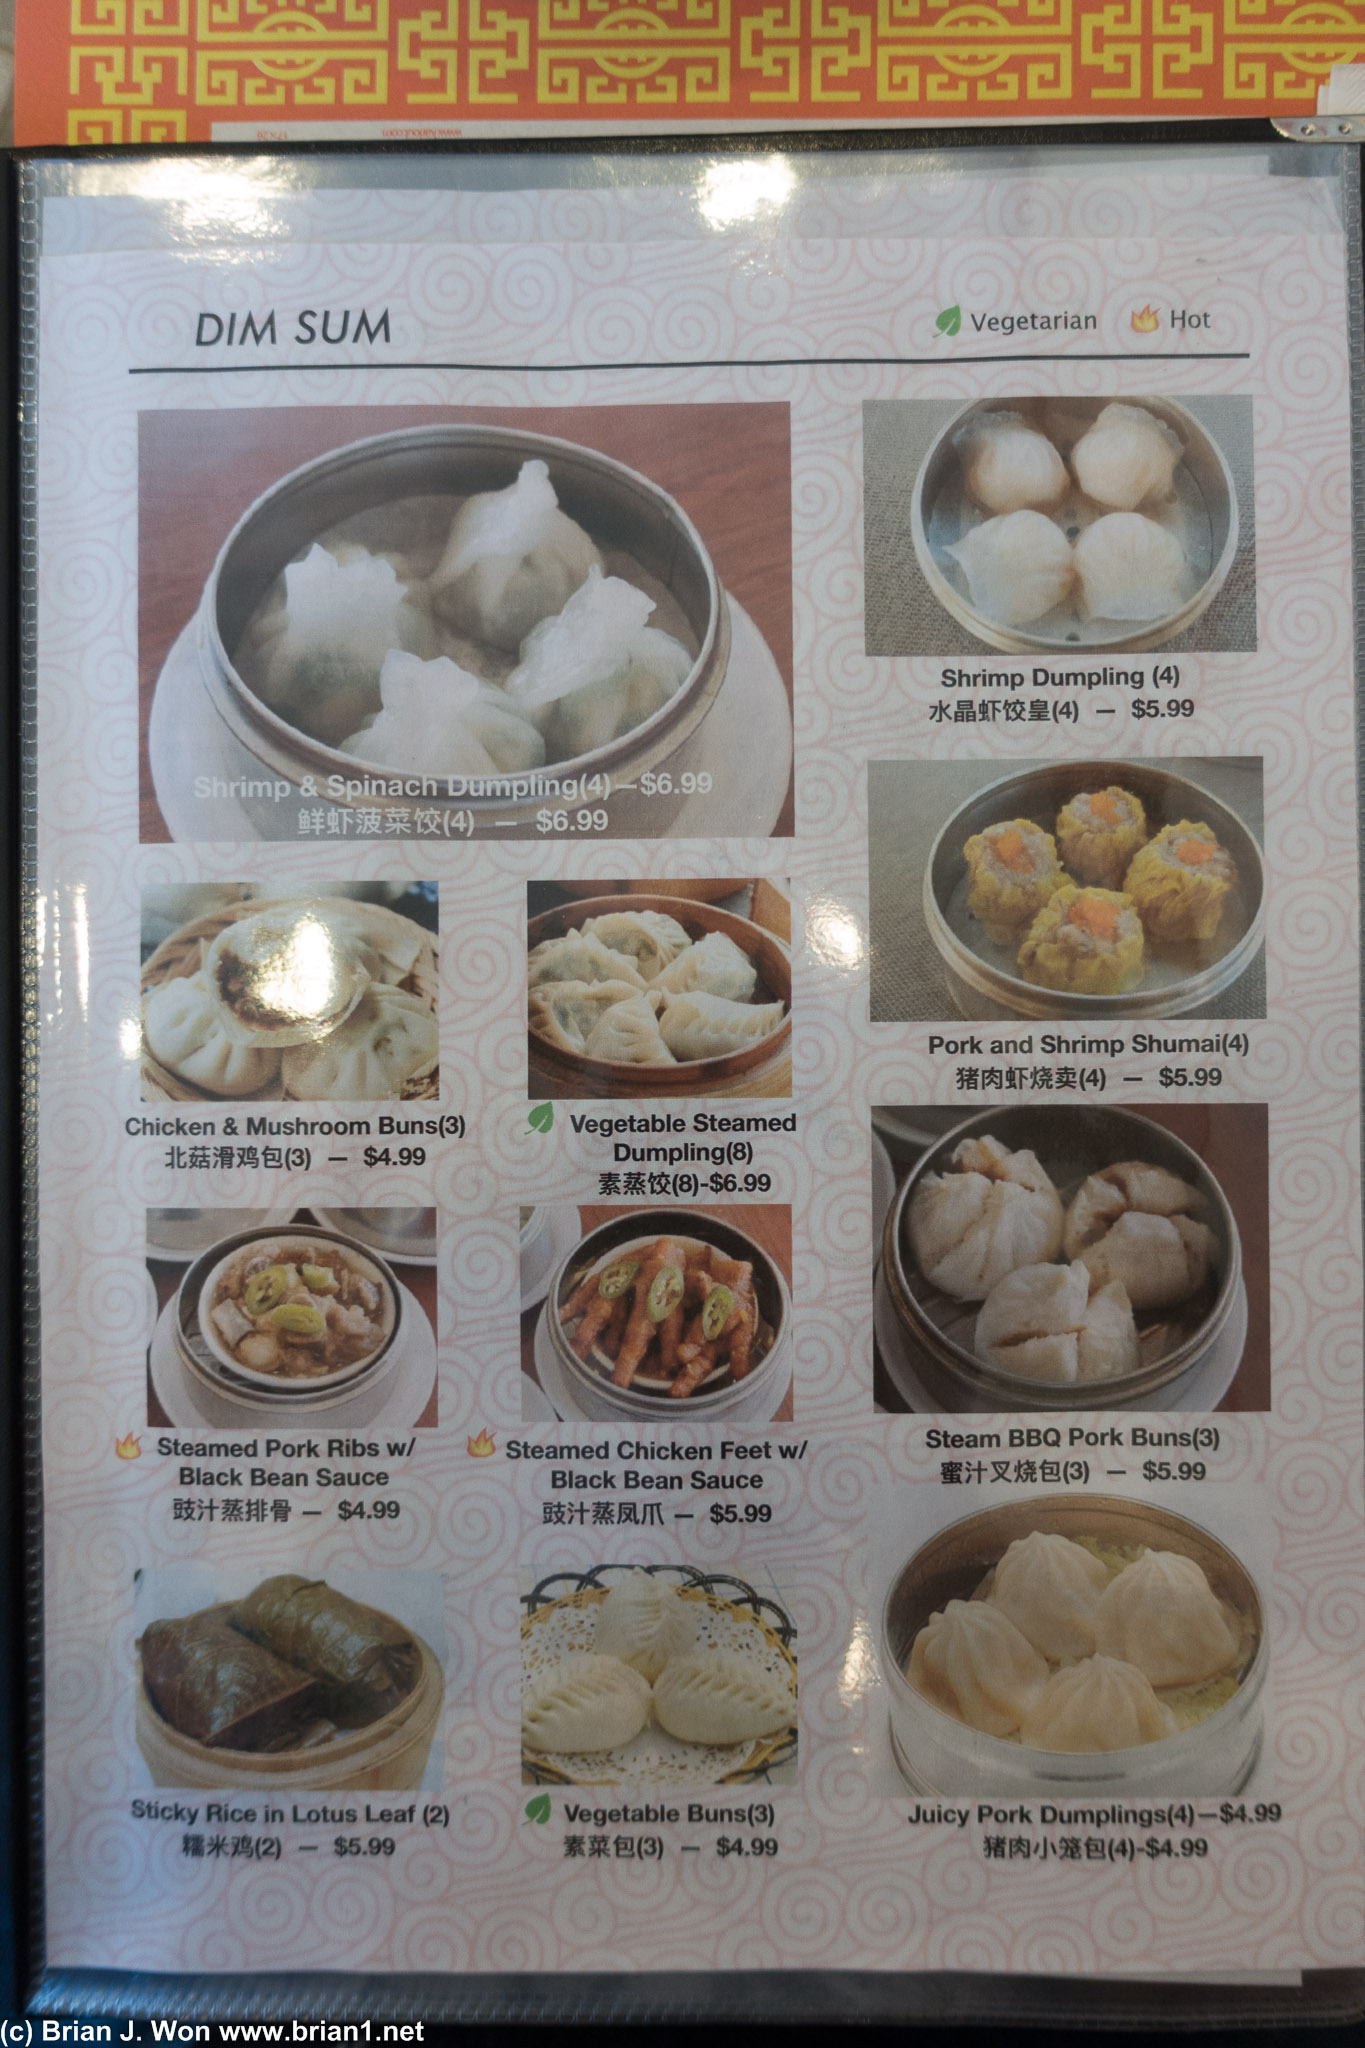 $5 and up for dim sum? $6 and up for most dishes? o_0